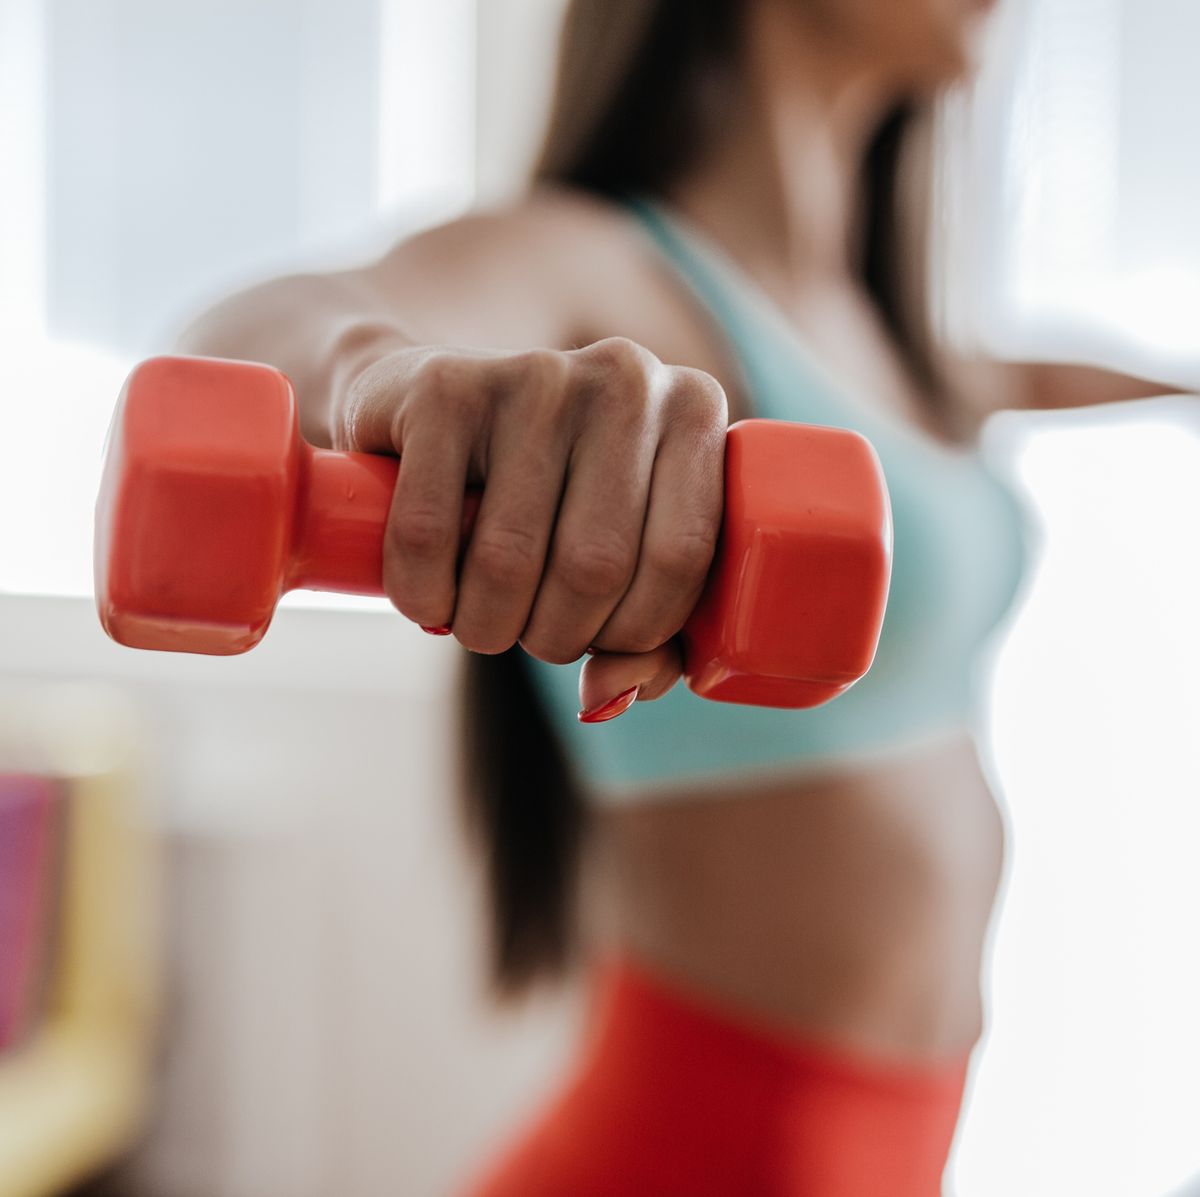 Weights for Women Part 4: Training lingo you need to know when